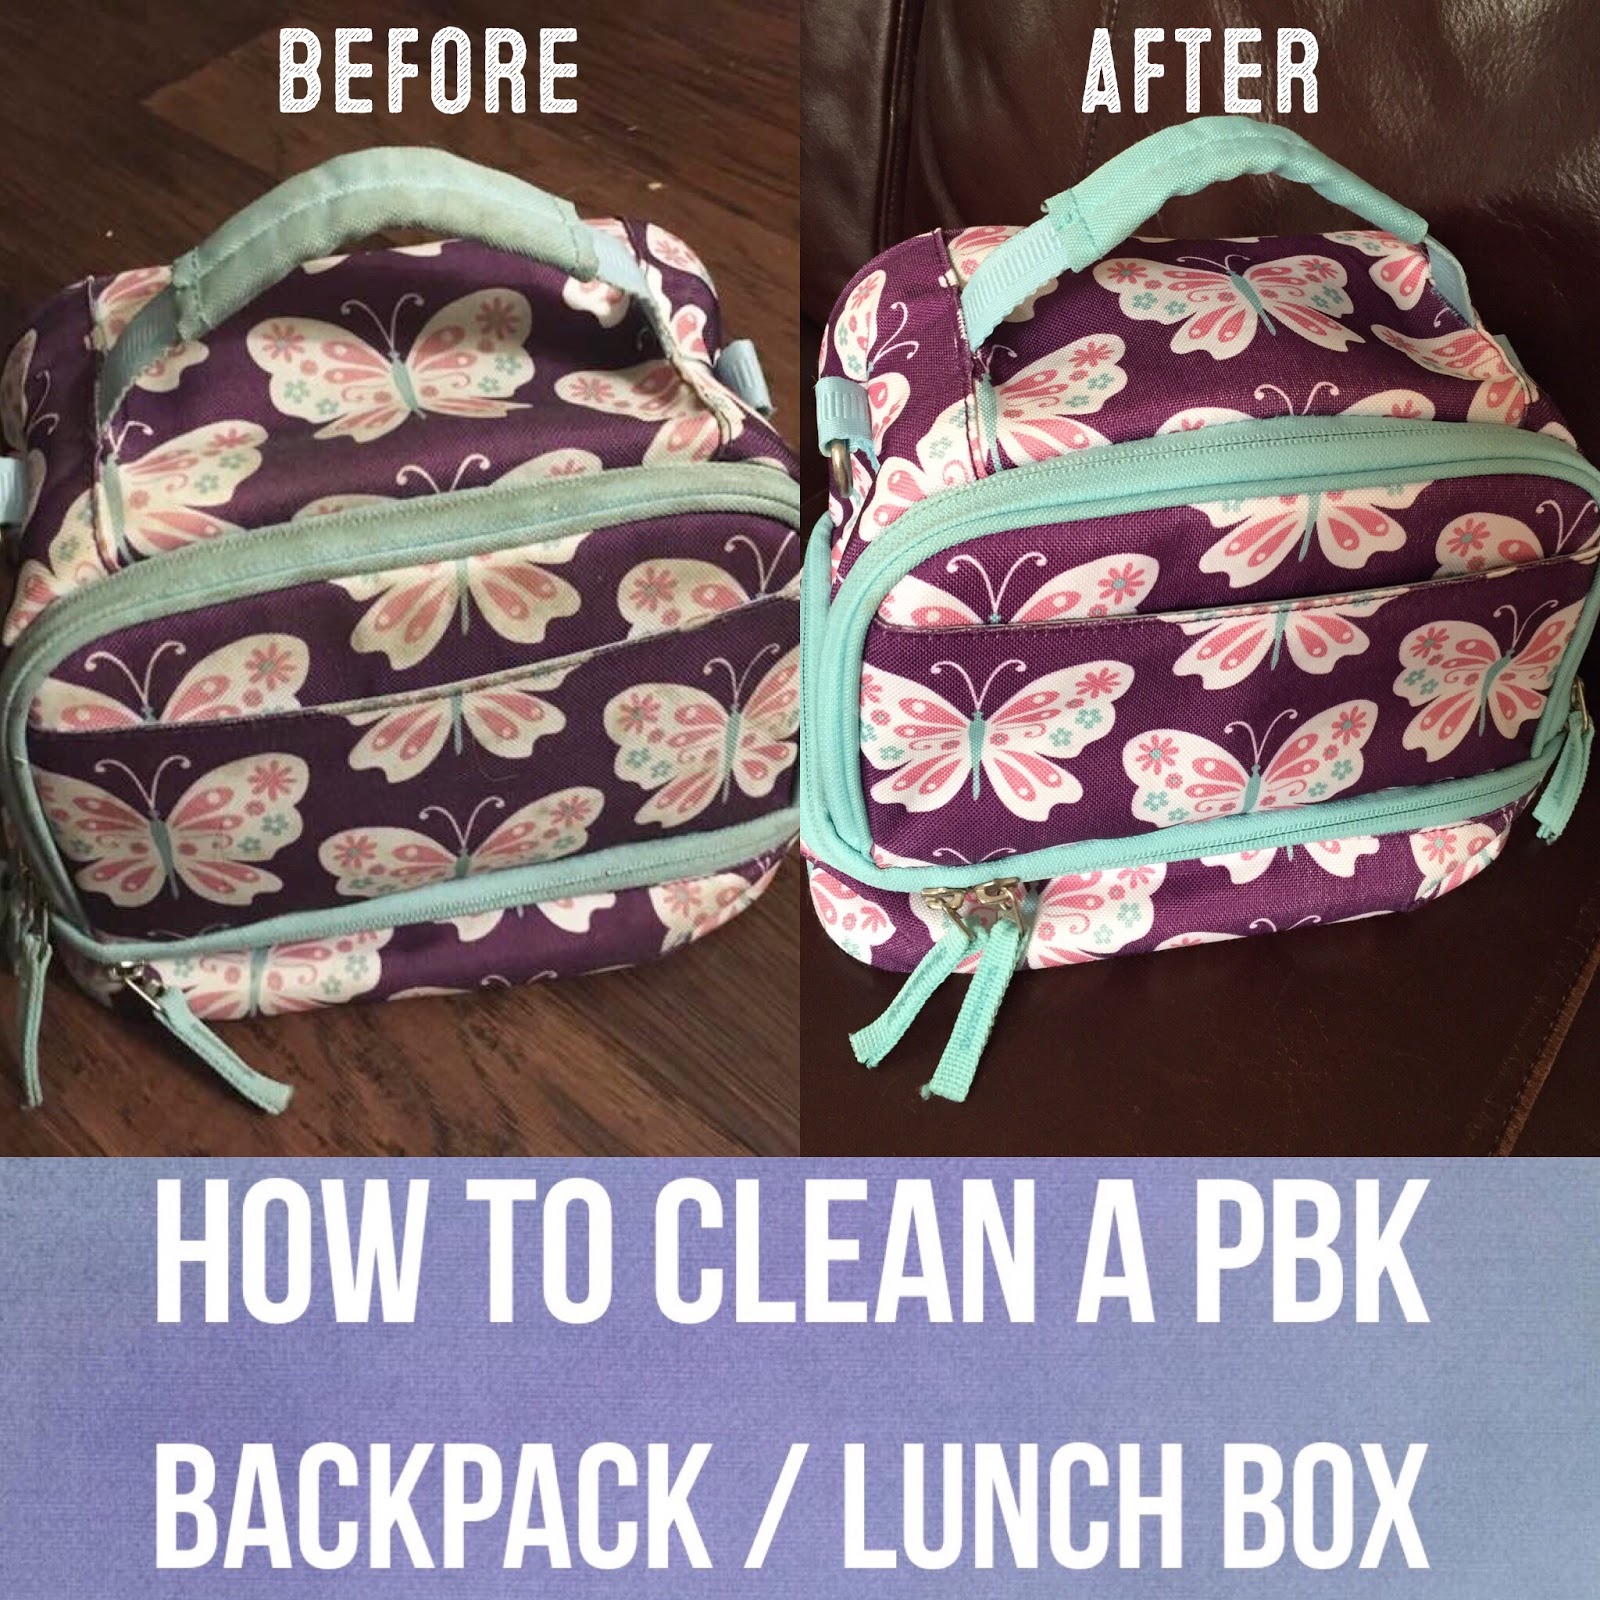 Live and Learn: DIY: How to Clean a Pottery Barn Kids Backpack / Lunch Box How To Wash A Pottery Barn Backpack